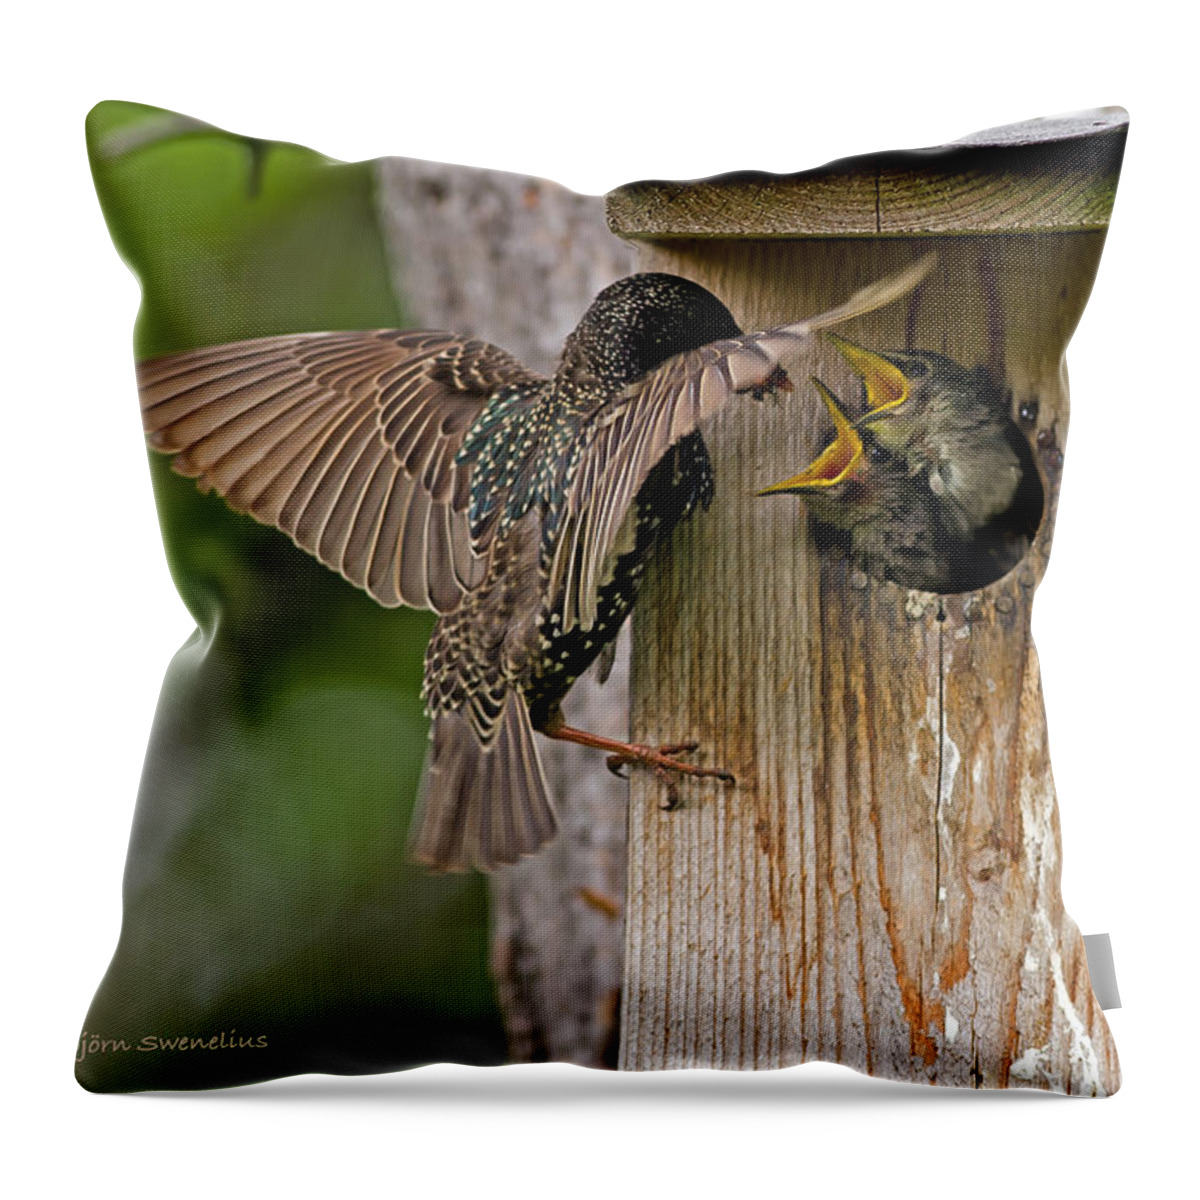 Feeding Starlings Throw Pillow featuring the photograph Feeding Starlings by Torbjorn Swenelius